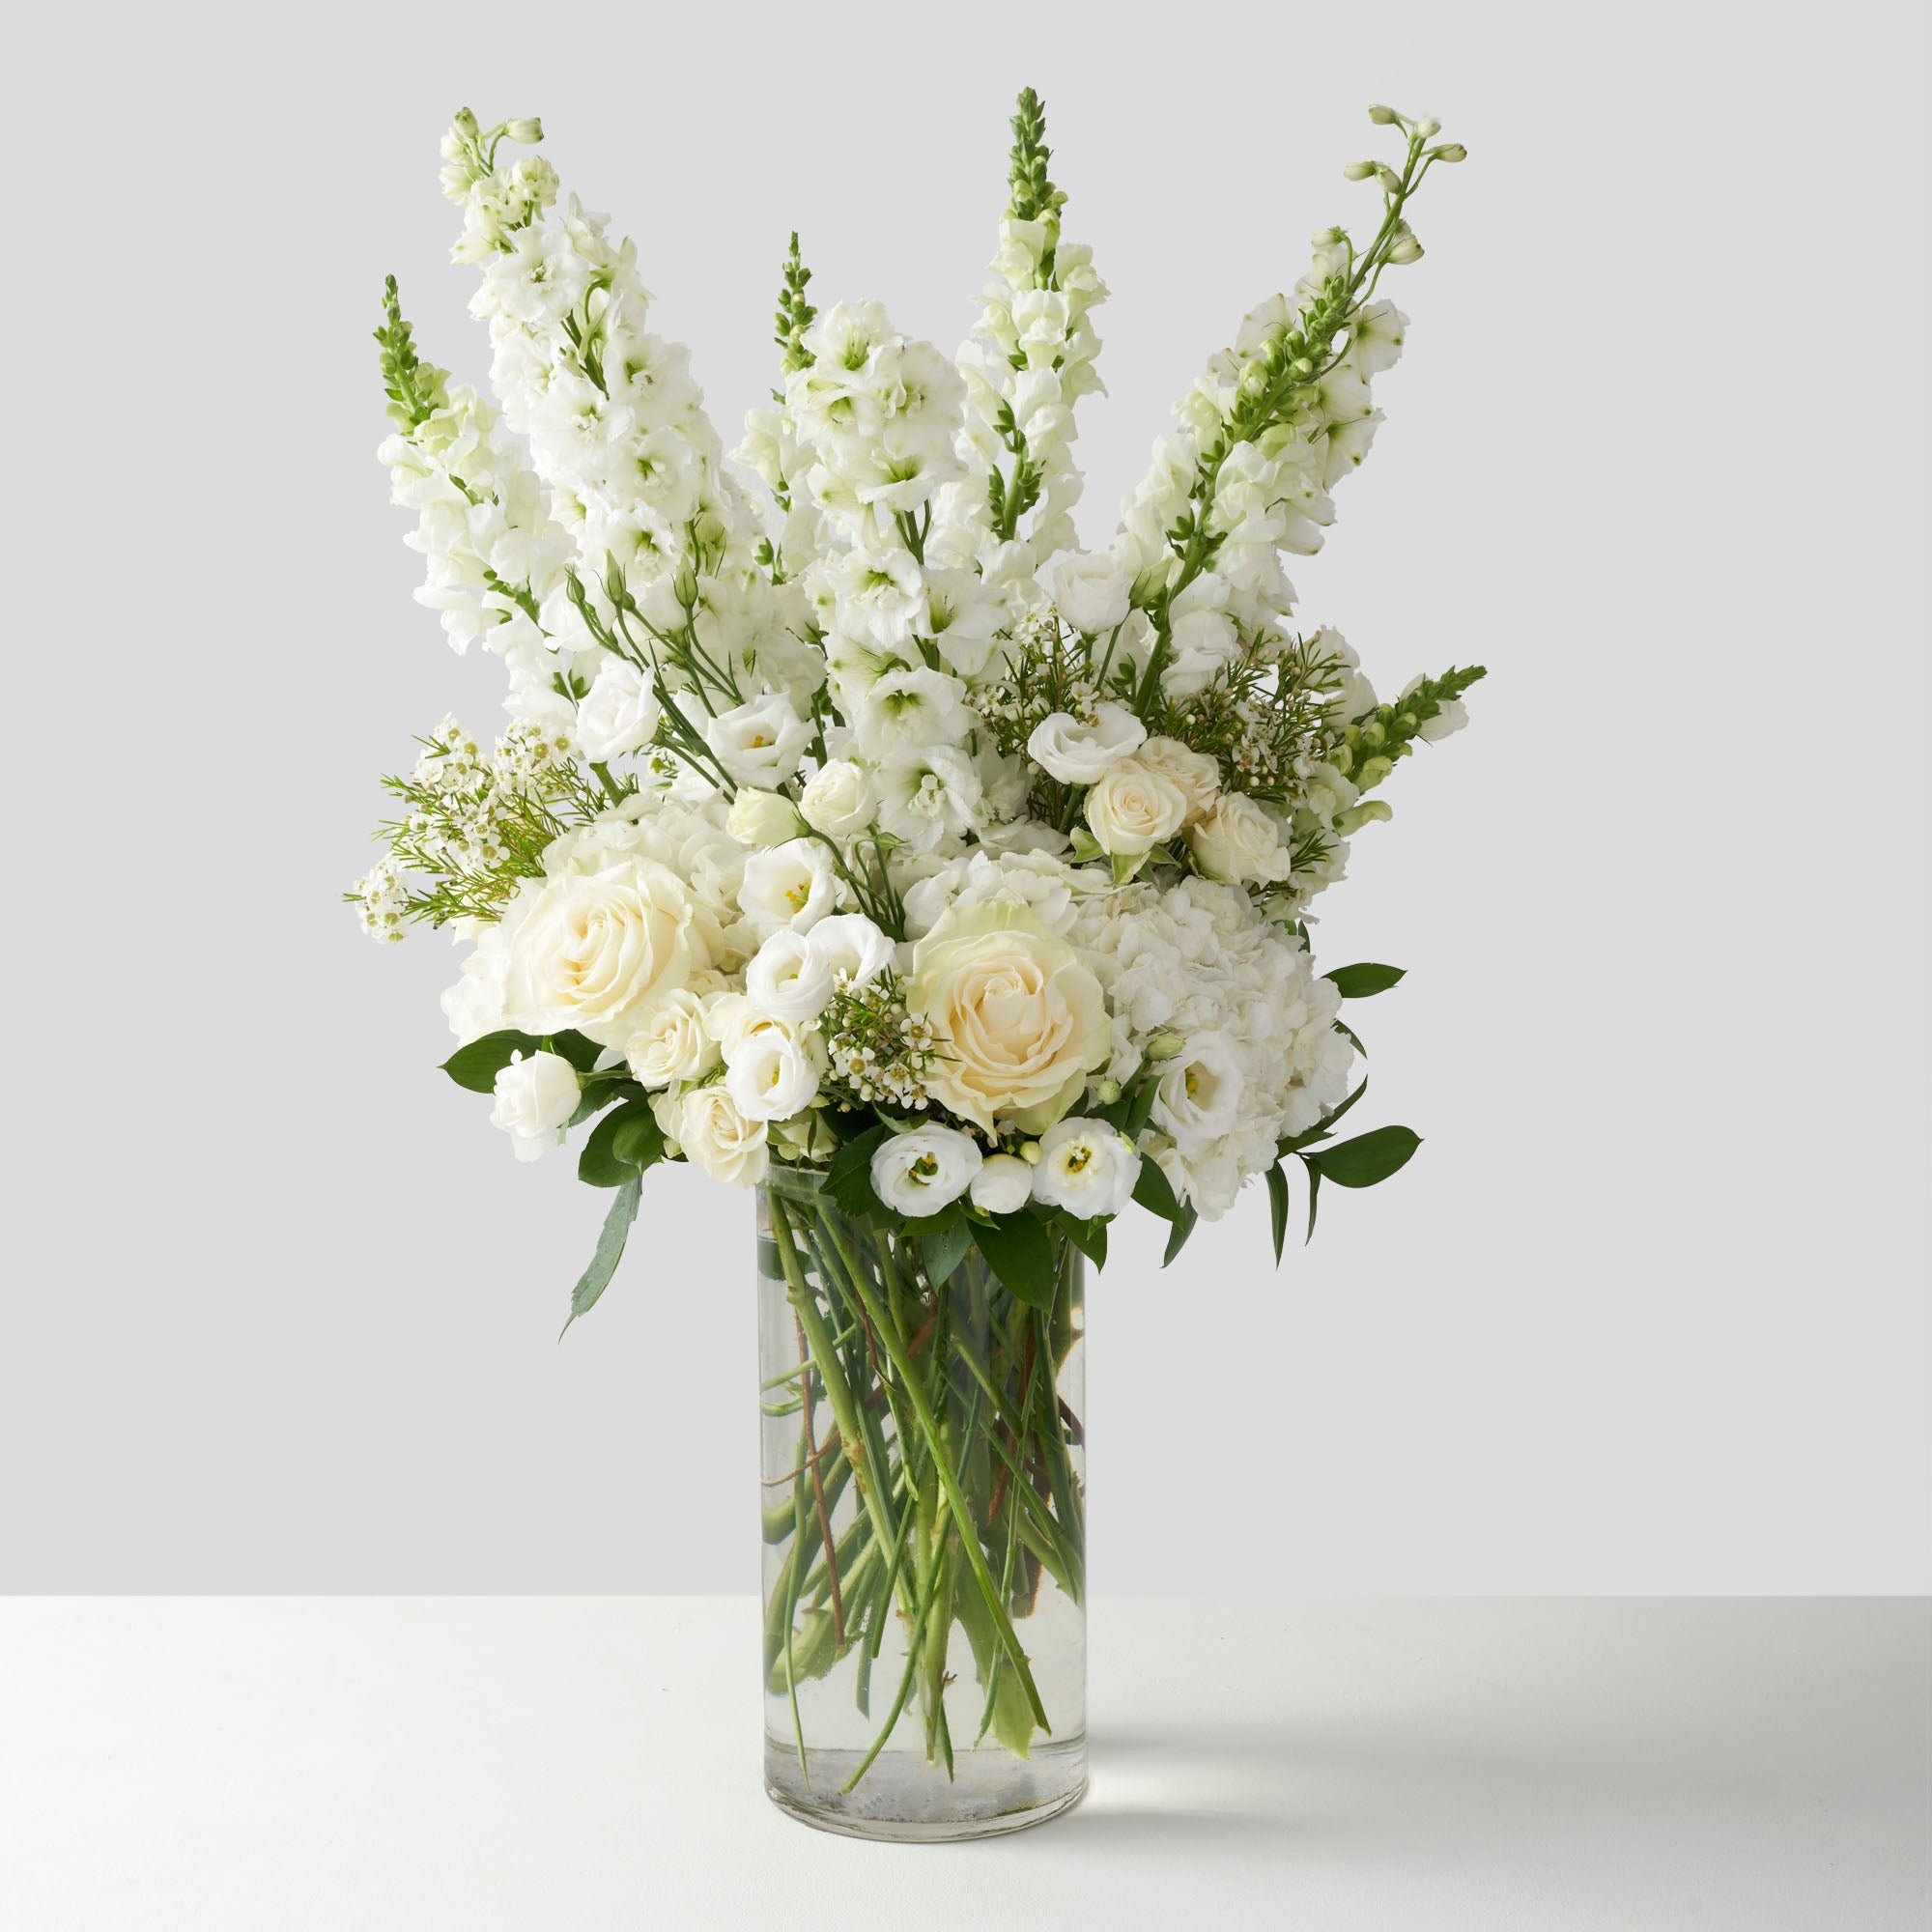 An all white flower arrangement composed of delphinium, roses, lisanthus, wax flower, and hydrangea 